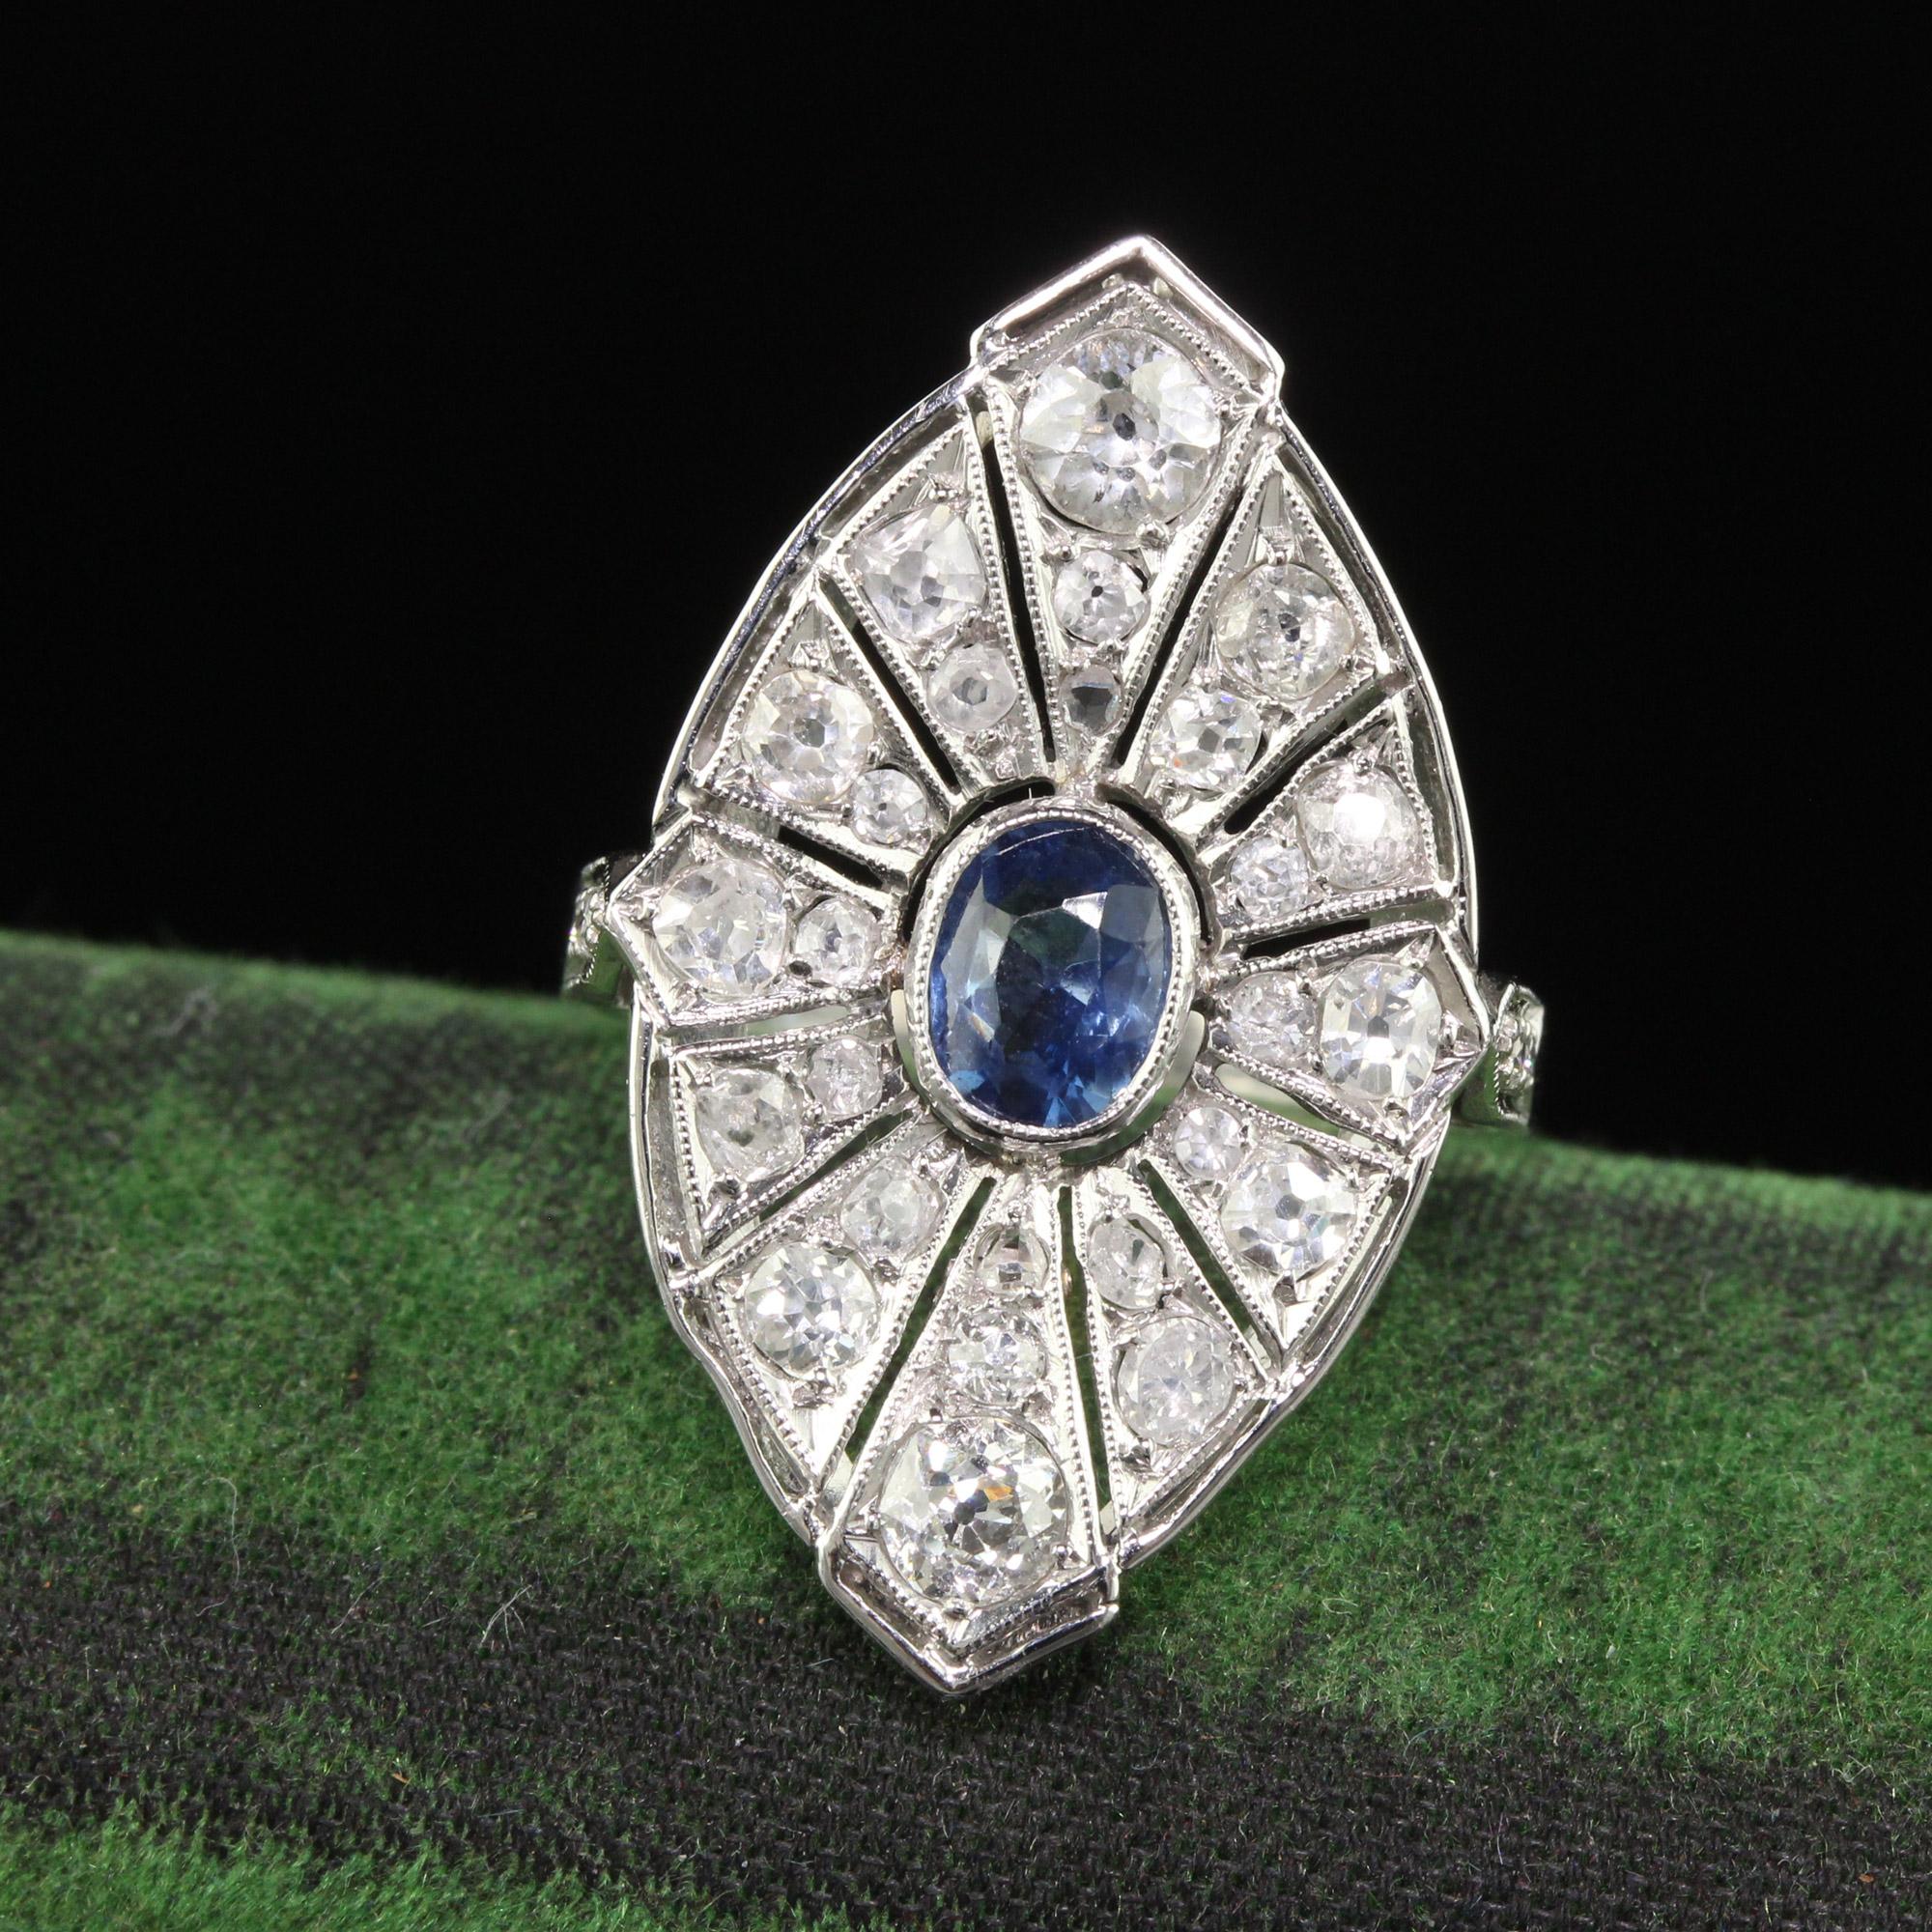 Beautiful Vintage Art Deco Style Platinum Old Mine Diamond and Sapphire Cocktail Ring. This gorgeous cocktail ring is beautifully crafted to the specifications of how jewelry was made in the 1930s. It holds beautiful old mine cut diamonds and a